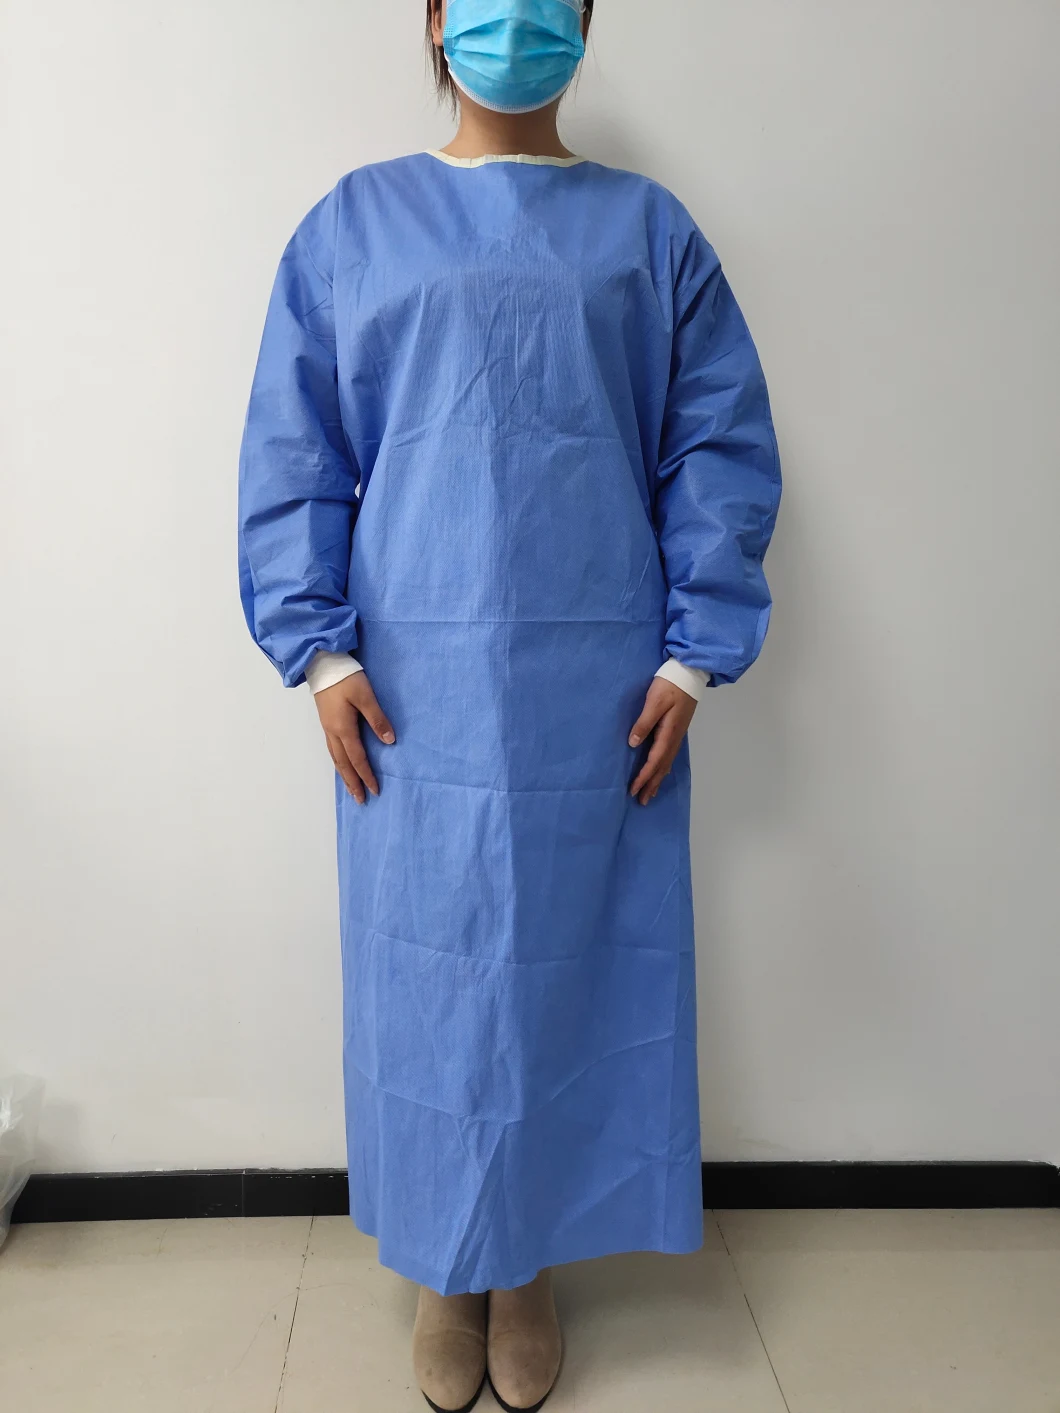 Light Weight Non-Woven Surgical Disposable Clothing for Doctors